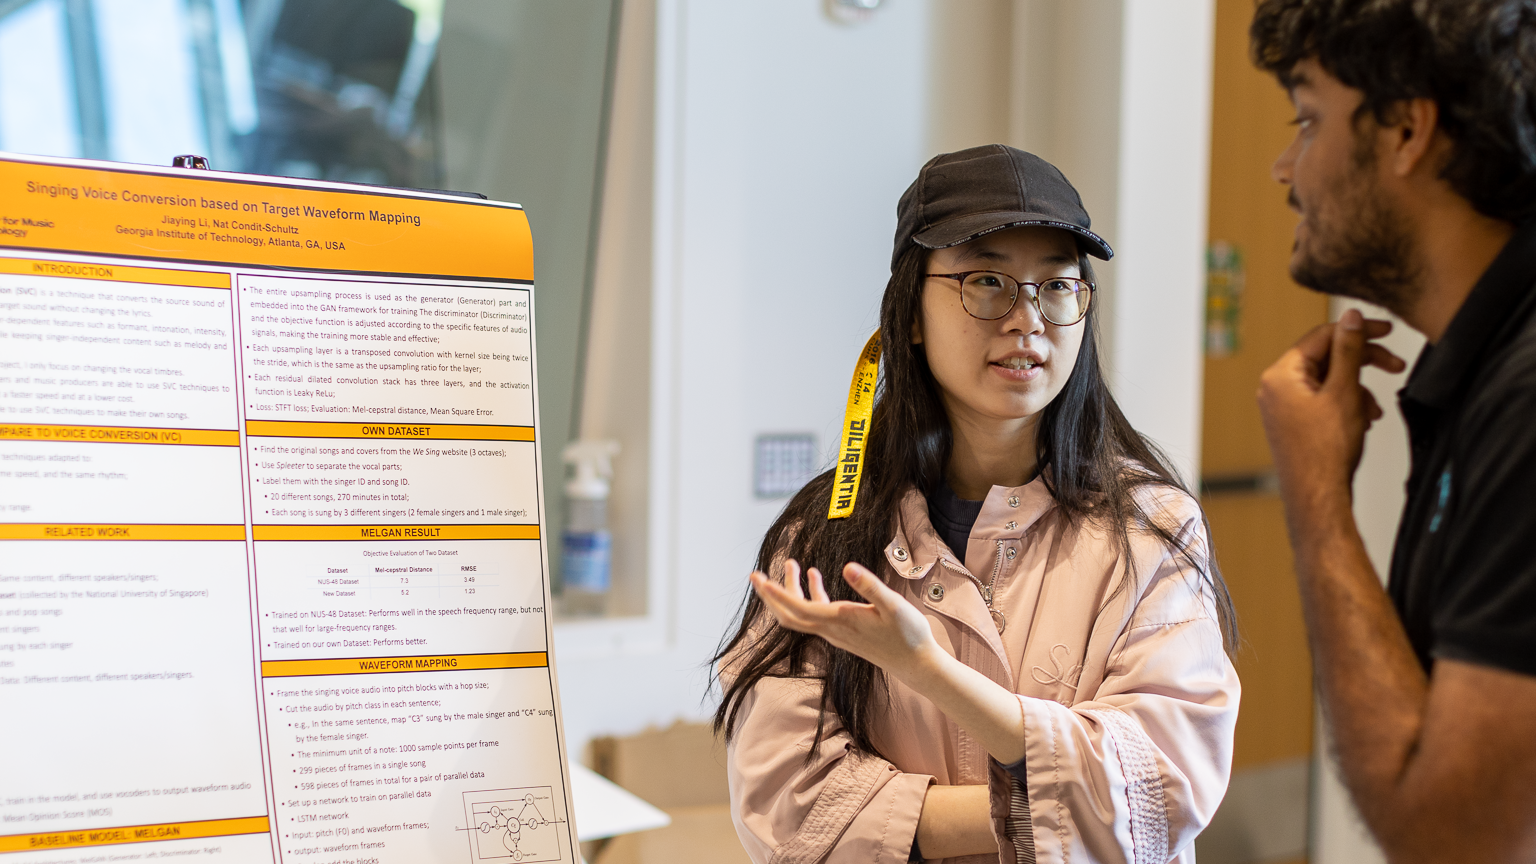 Jiaying Li in front of a research poster, talking to another student